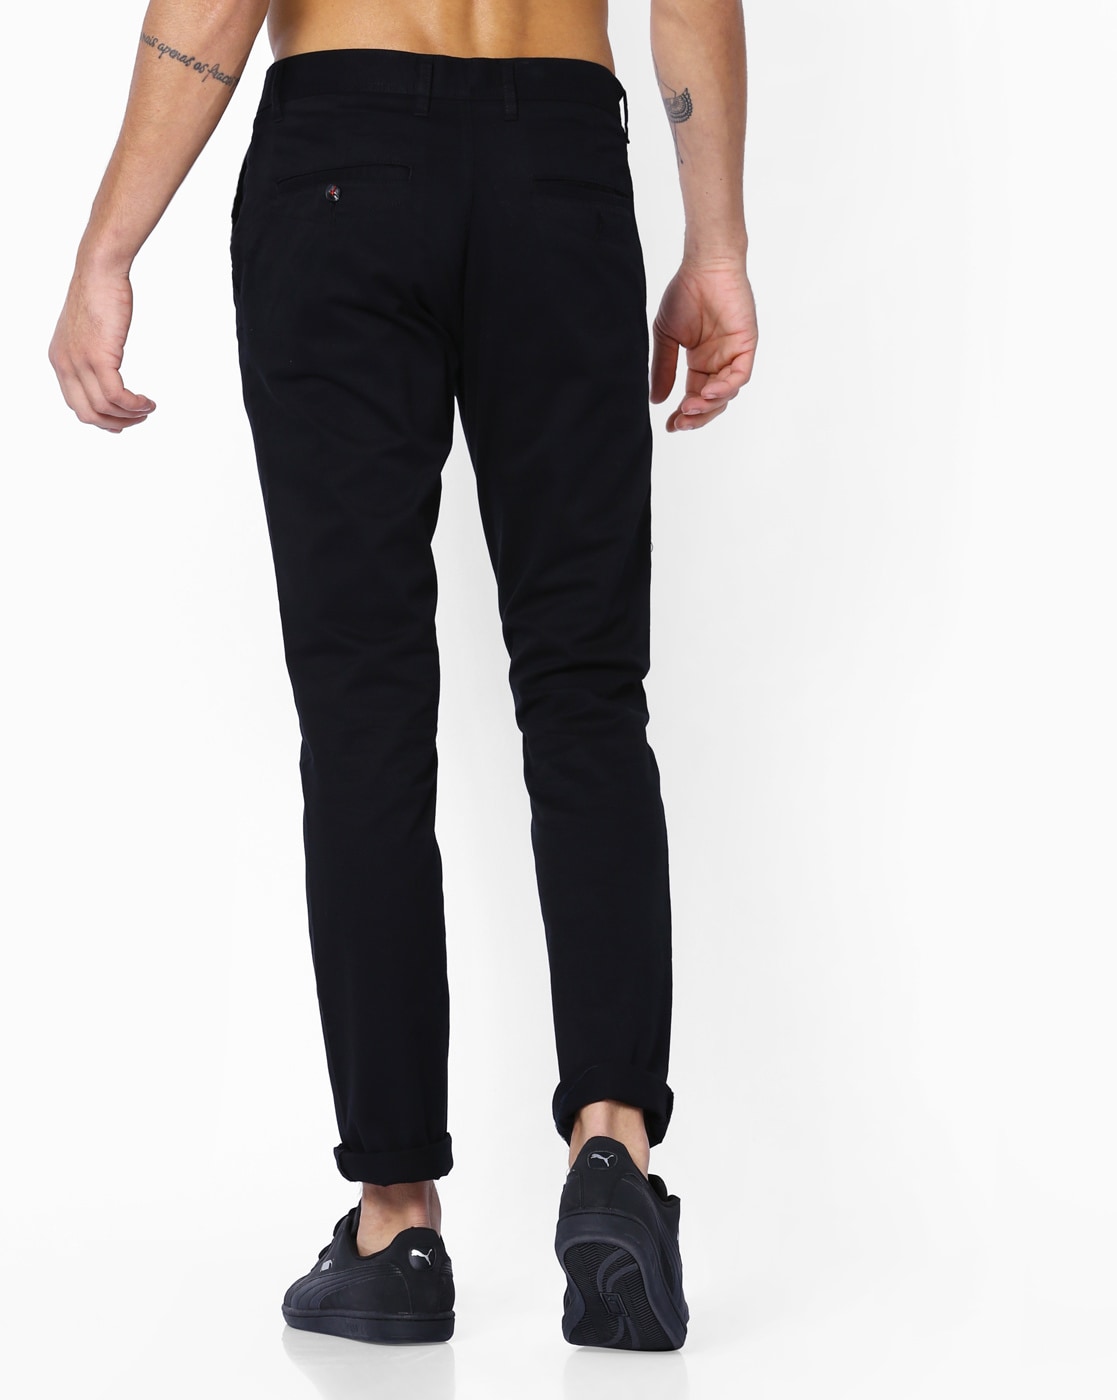 Blackberrys Chinos outlet  Men  1800 products on sale  FASHIOLAcouk